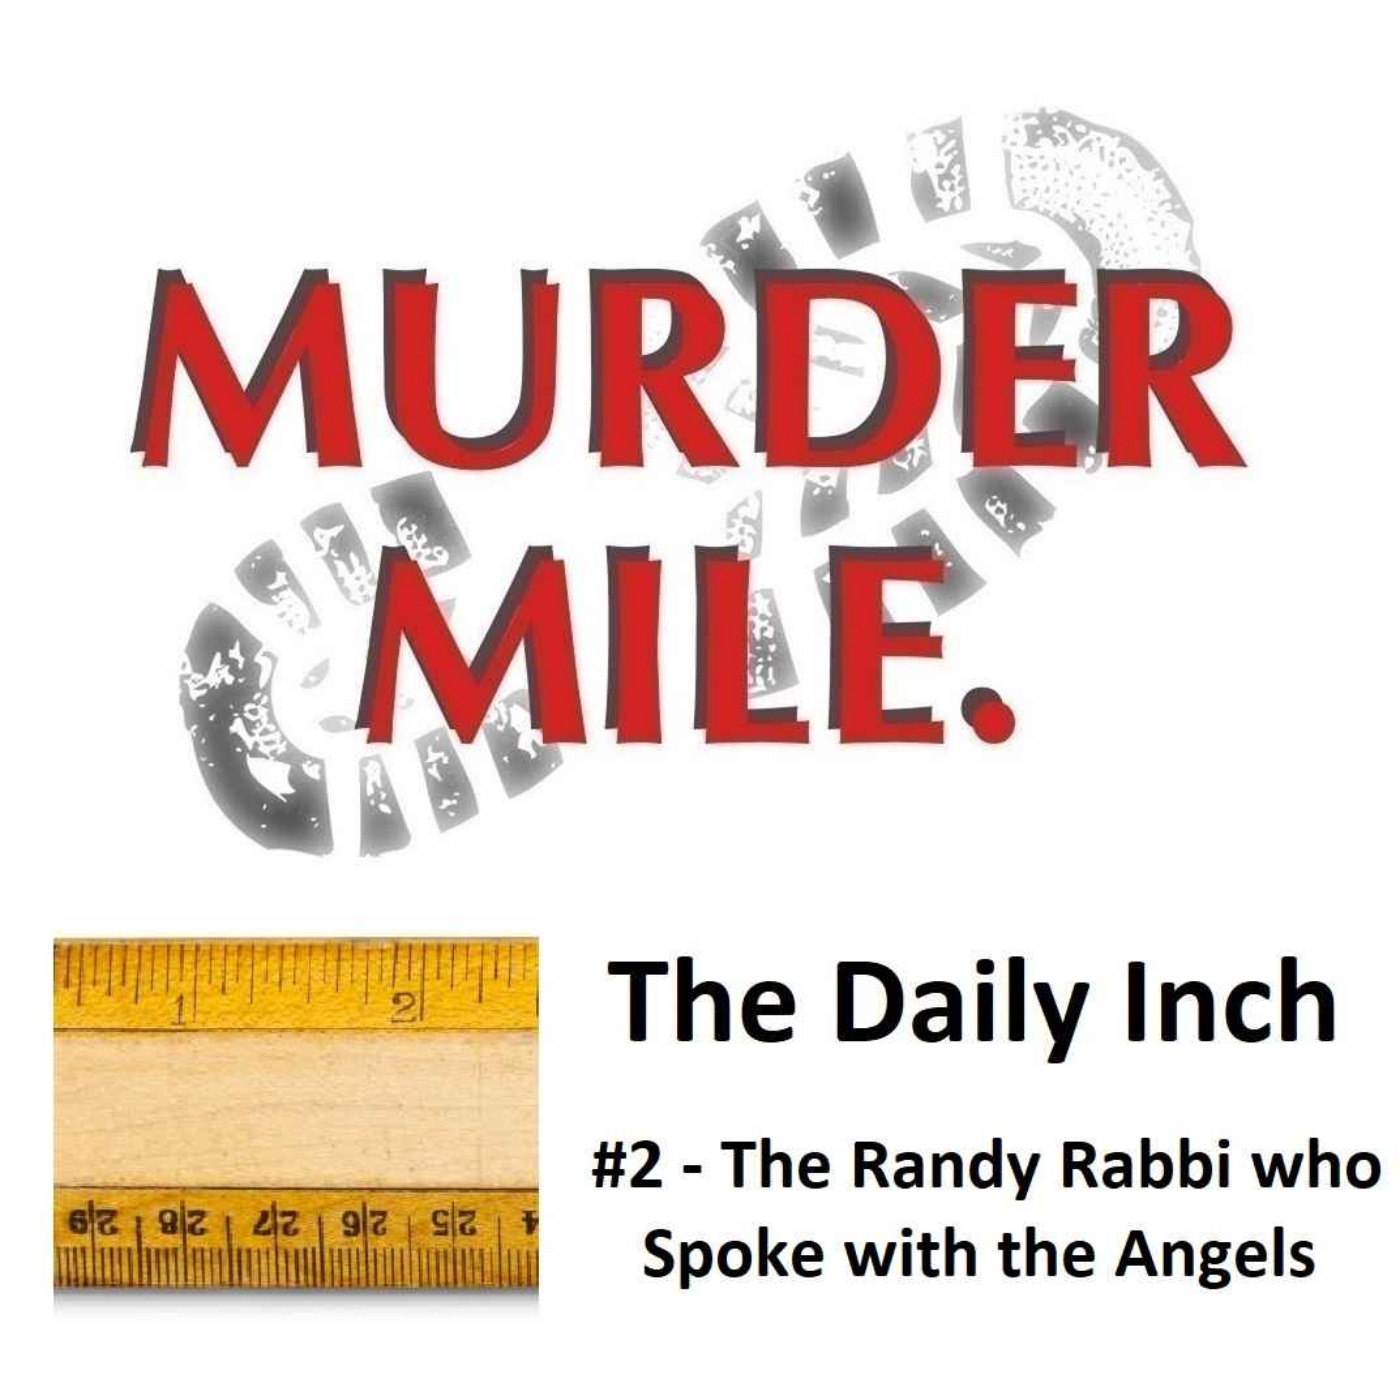 The Daily Inch #2 - 'The Randy Rabbi who Spoke with the Angels'